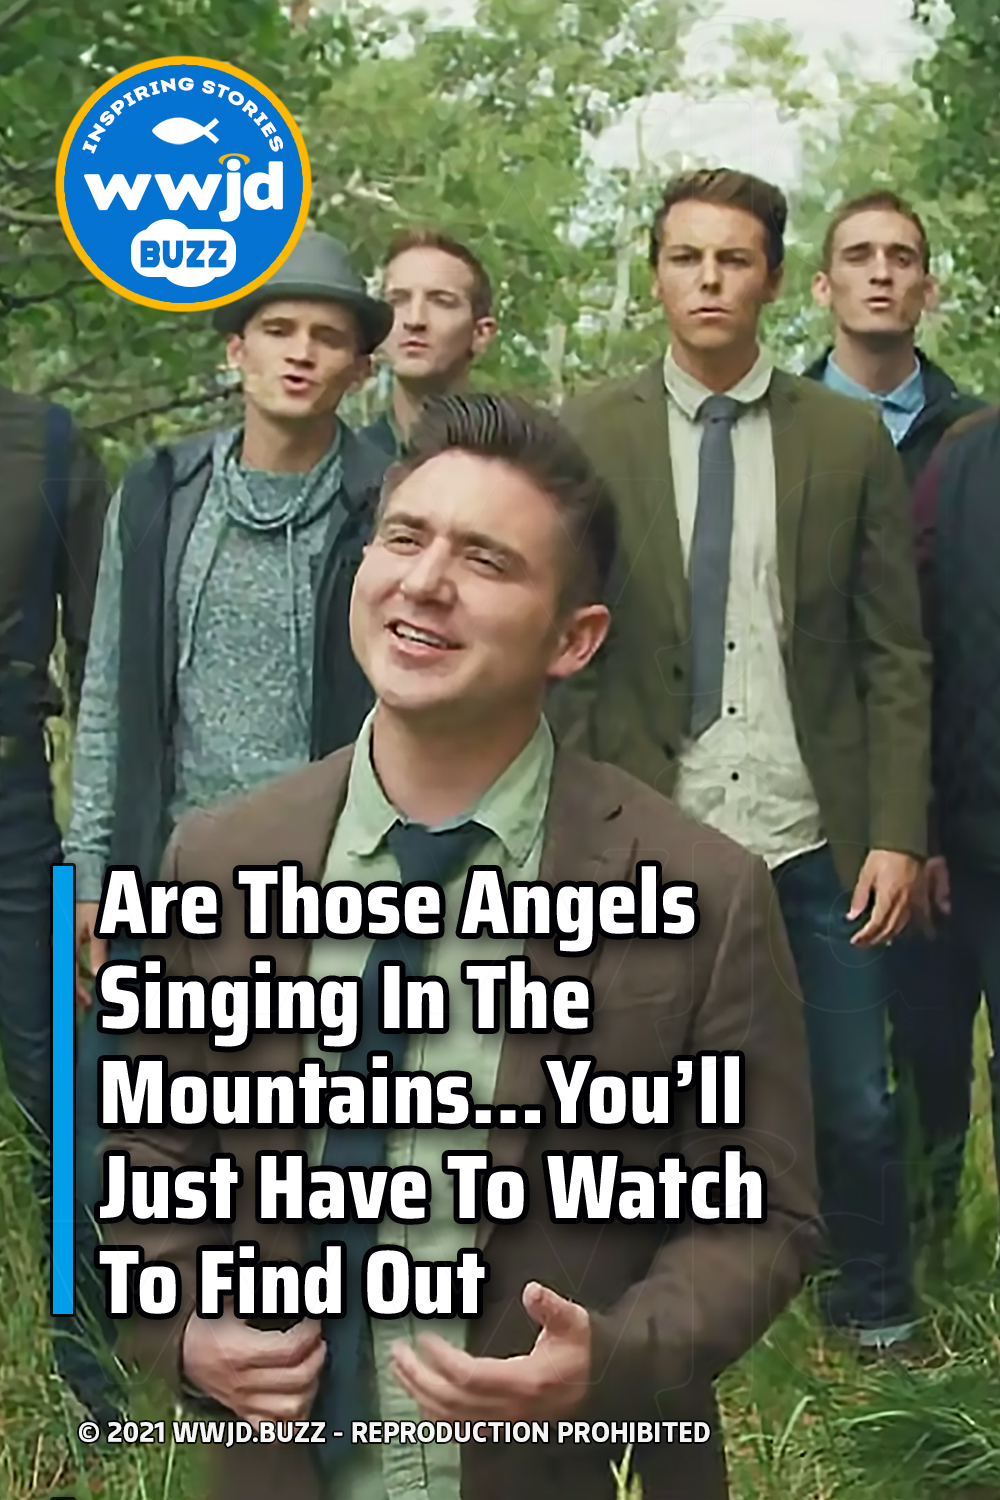 Are Those Angels Singing In The Mountains...You’ll Just Have To Watch To Find Out